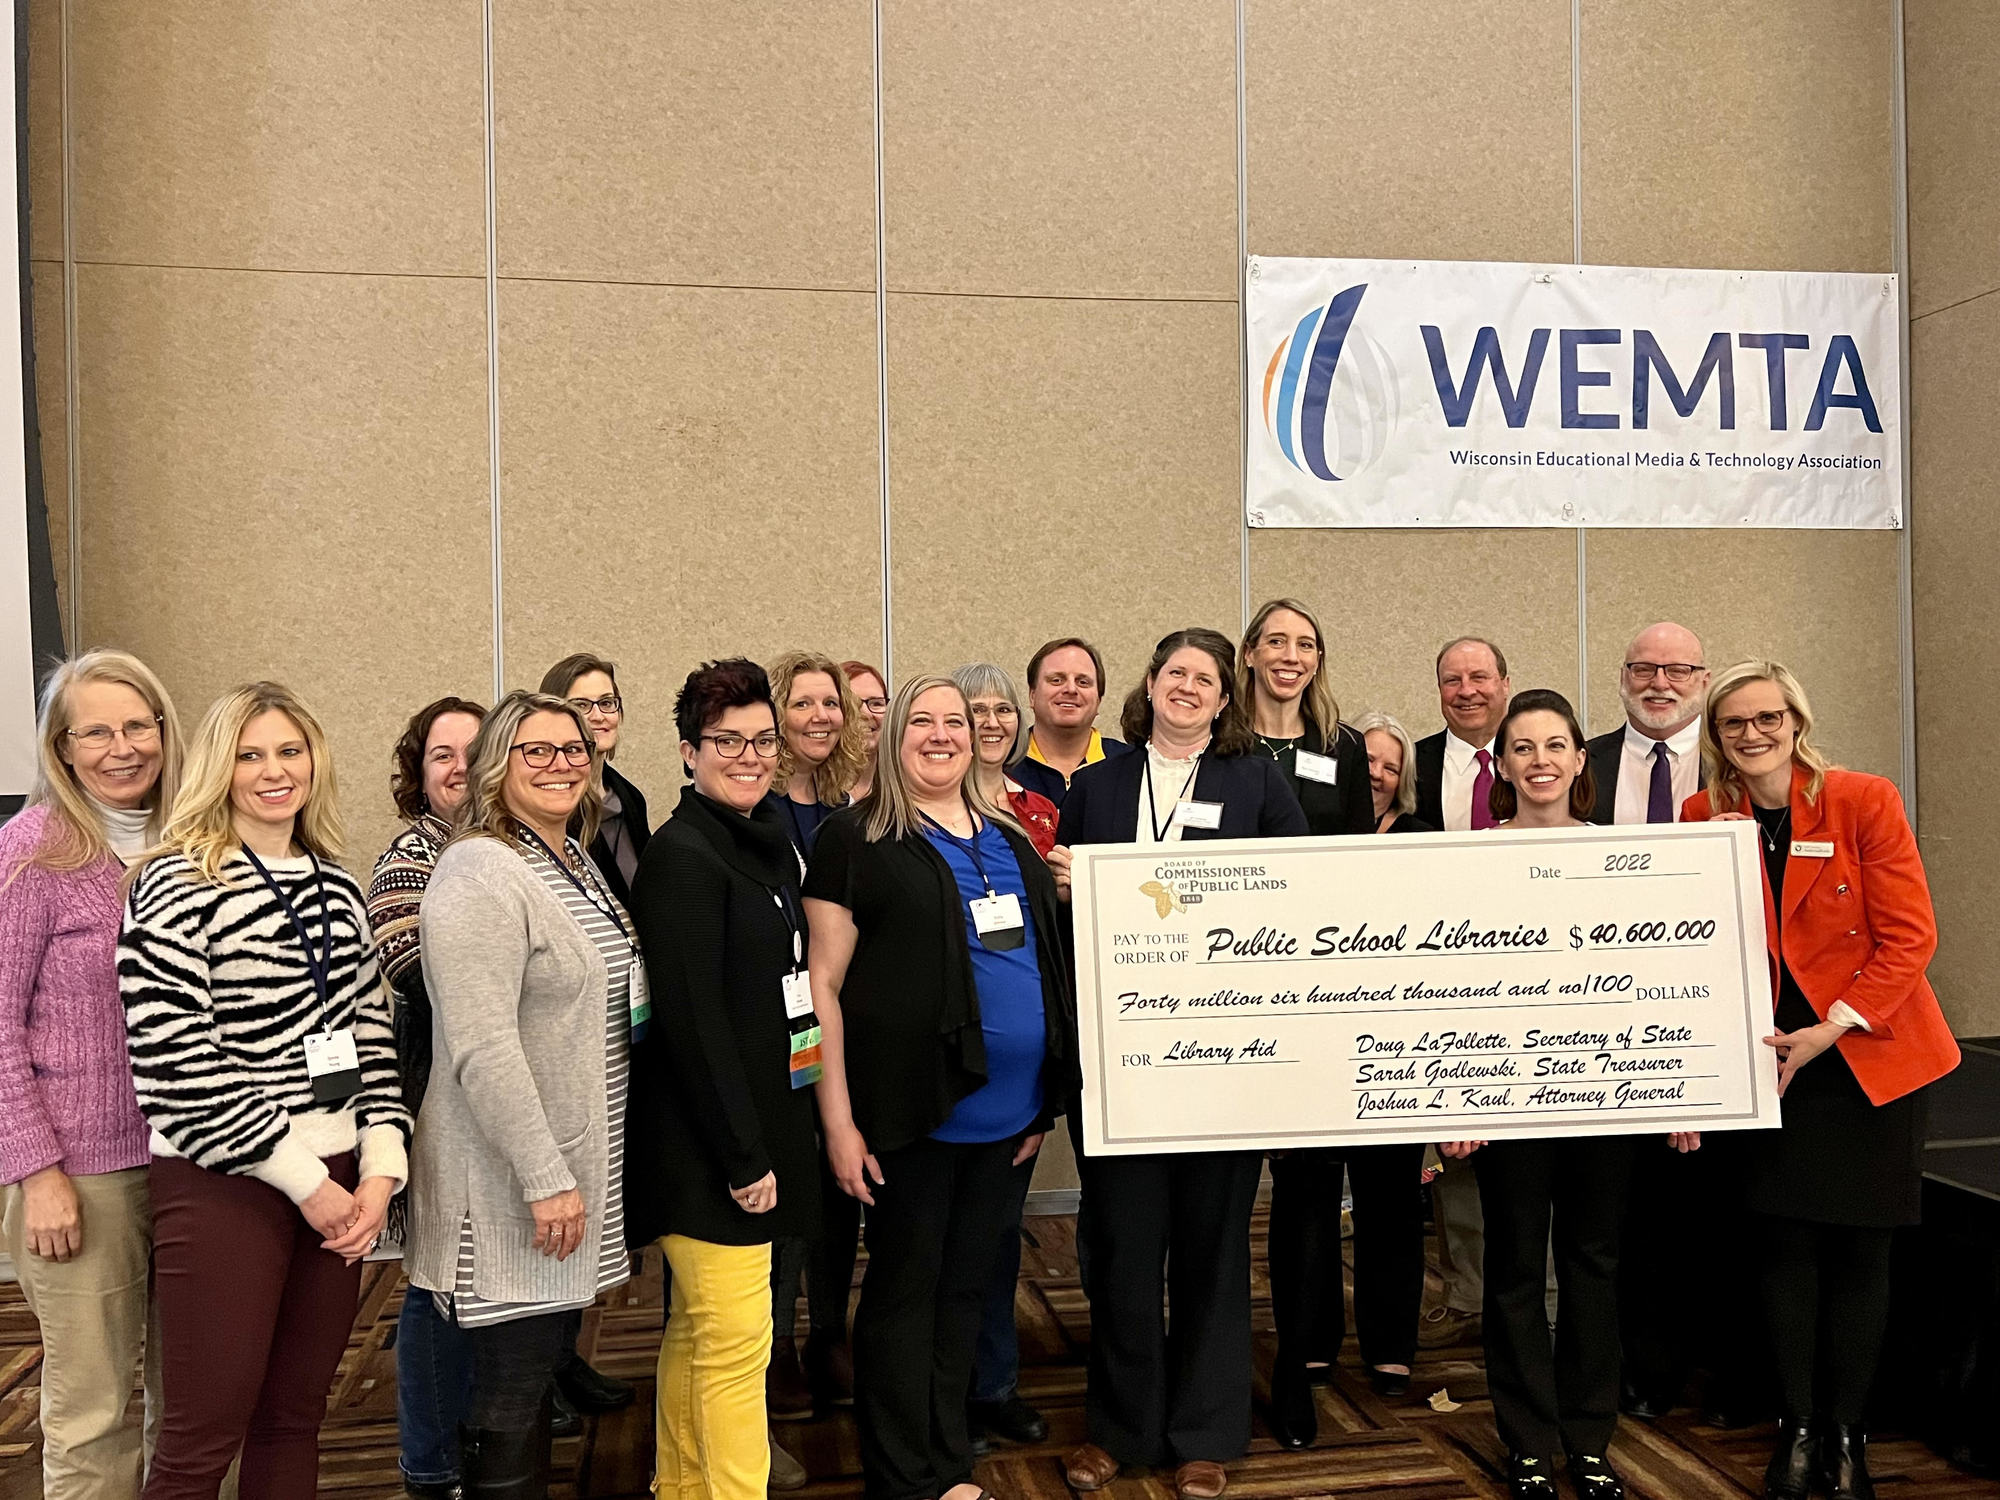 Photo of the WEMTA conference